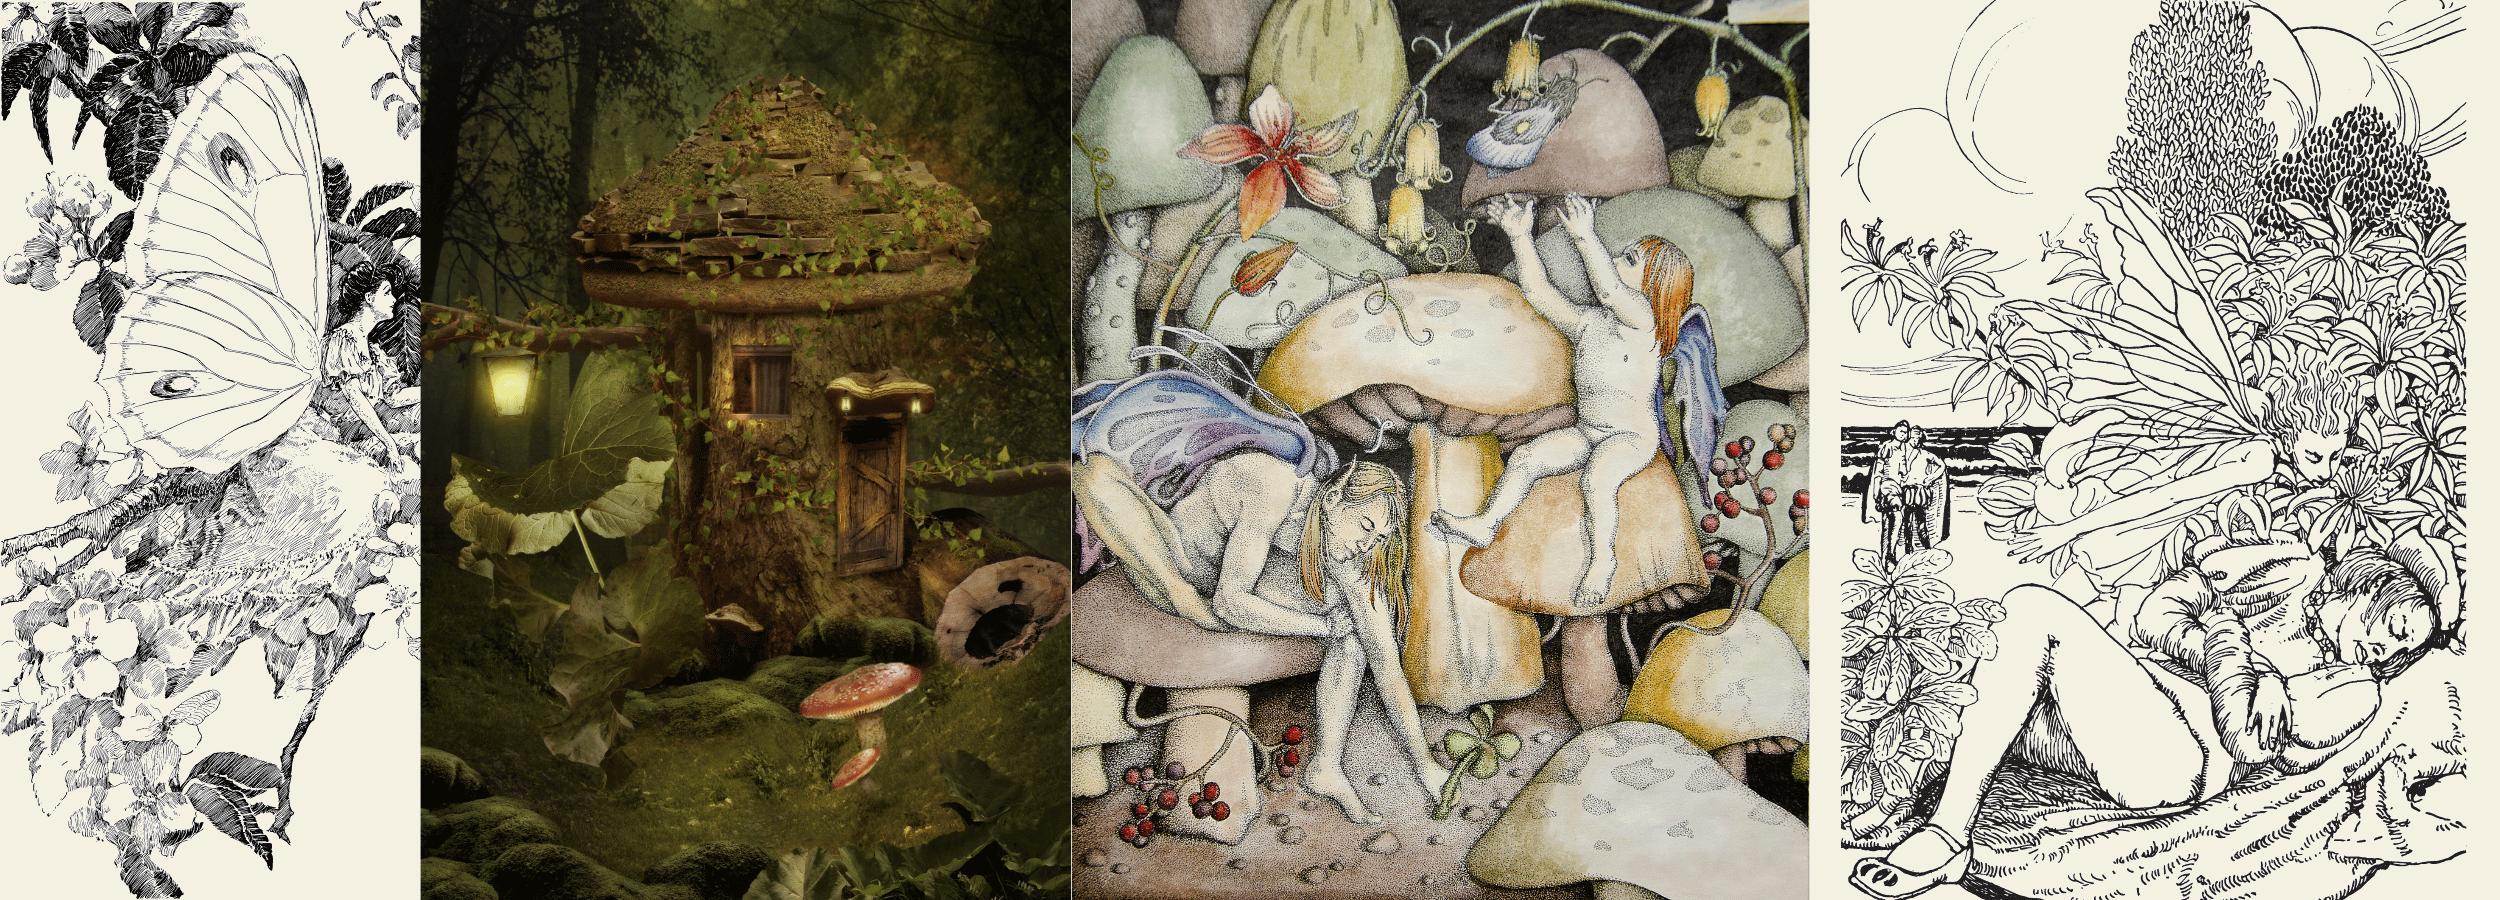 fairies and gnomes as examples of nature spirits